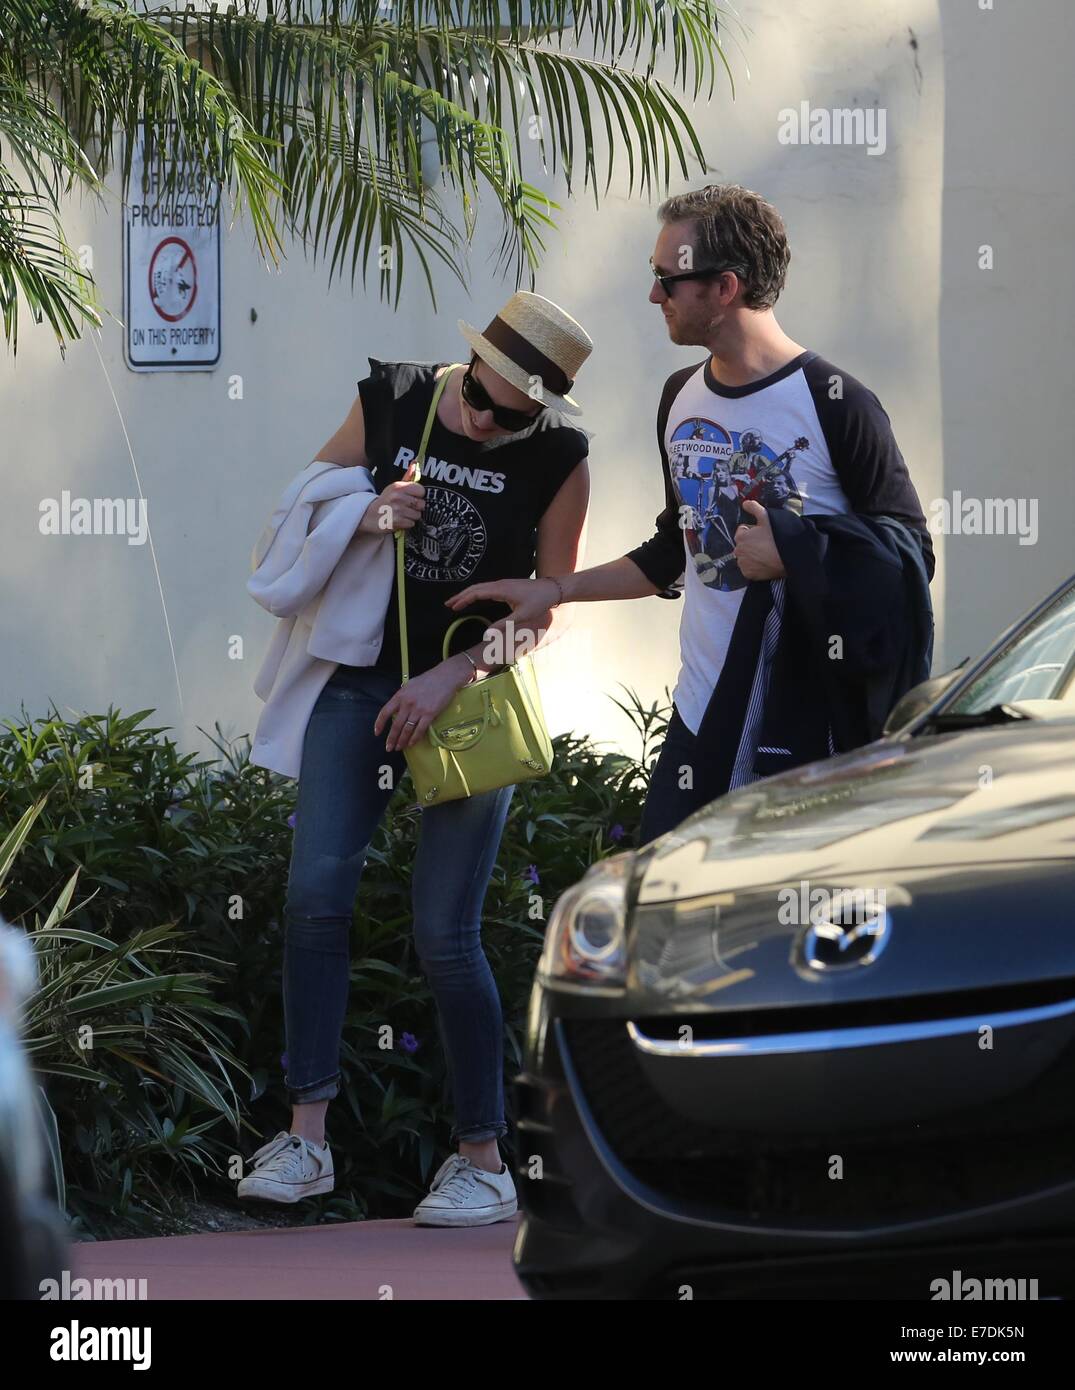 Anne Hathaway wearing a Ramones t-shirt while husband Adam Shulman featured wearing a Fleetwood Mac top while out and about walking around South Beach after lunch  Featuring: Anne Hathaway,Adam Shulman Where: Miami Beach, Florida, United States When: 09 Mar 2014 Stock Photo